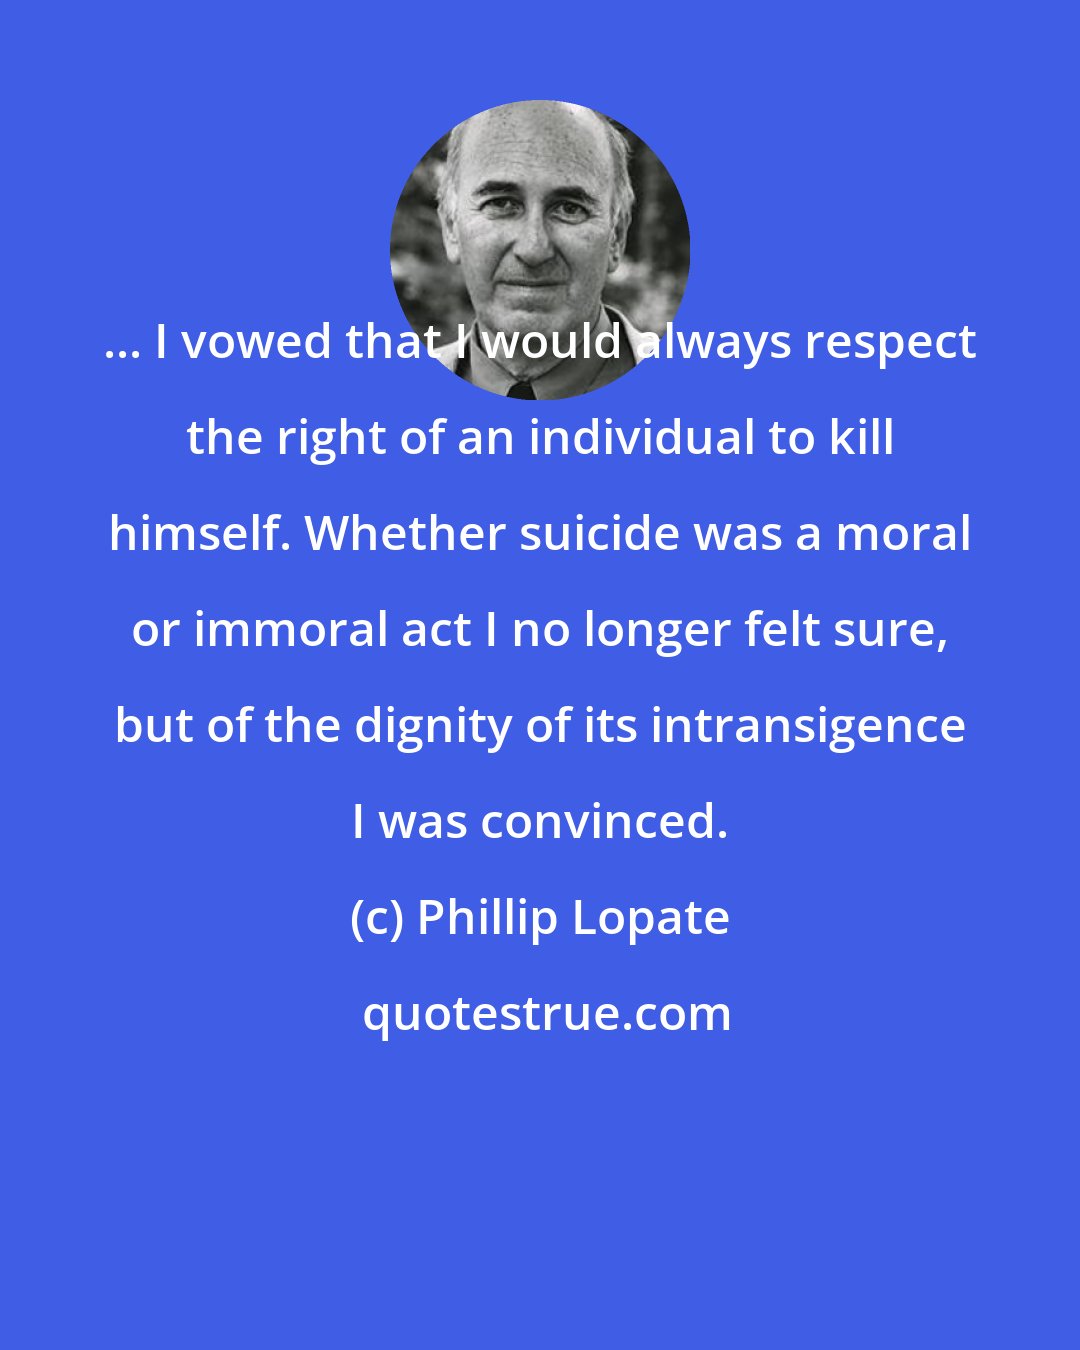 Phillip Lopate: ... I vowed that I would always respect the right of an individual to kill himself. Whether suicide was a moral or immoral act I no longer felt sure, but of the dignity of its intransigence I was convinced.